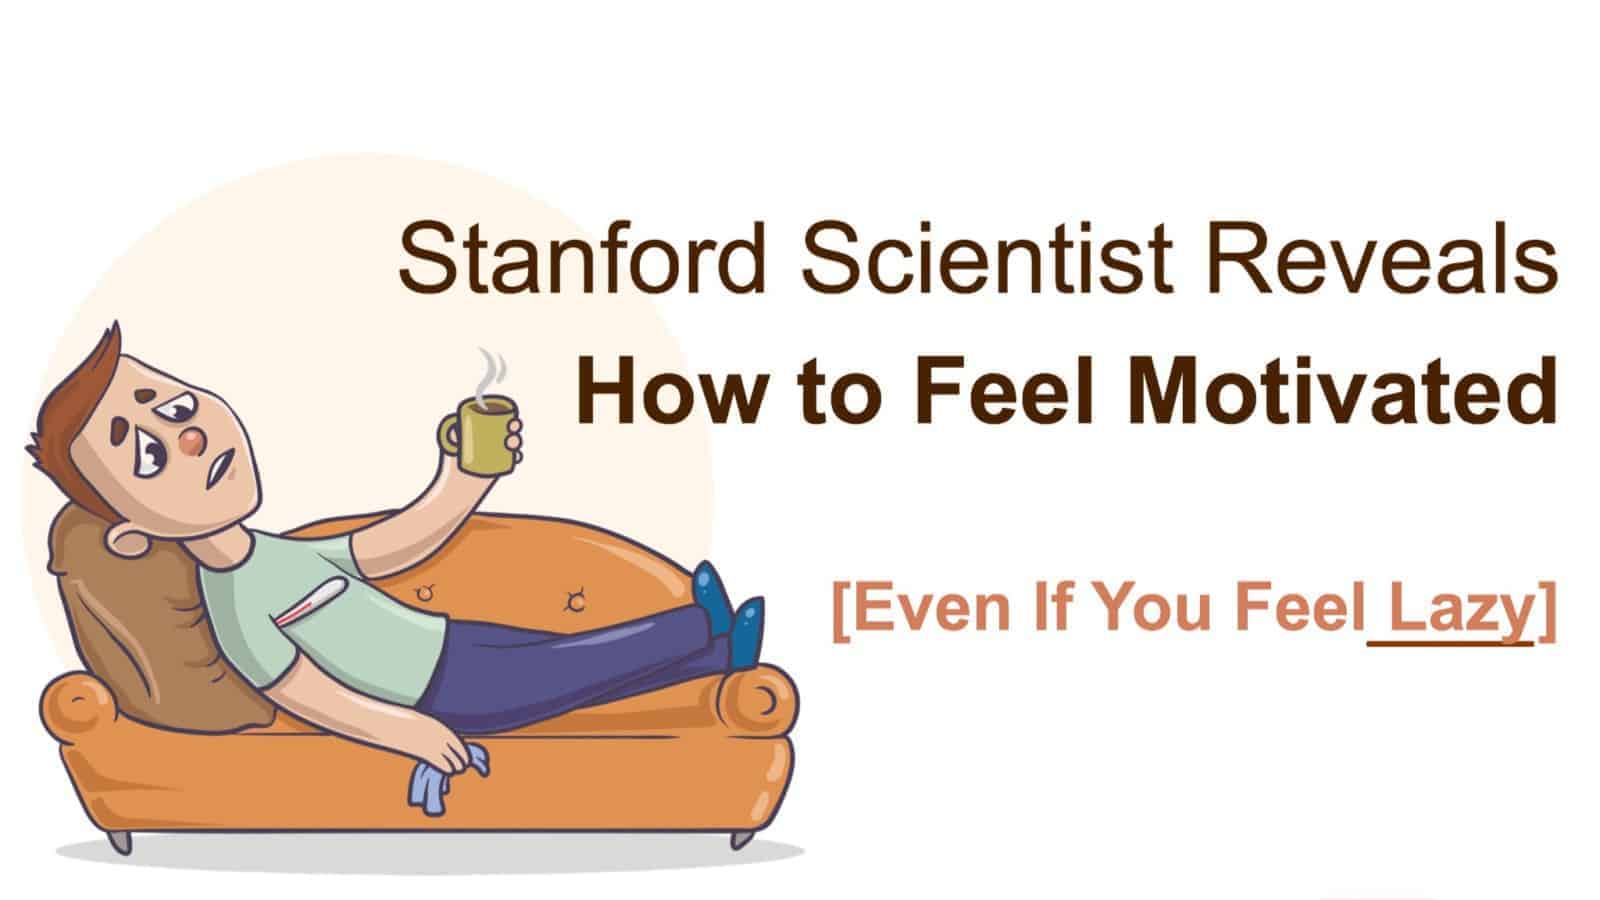 Stanford Scientist Reveals How to Feel Motivated (Even If You Feel Lazy)